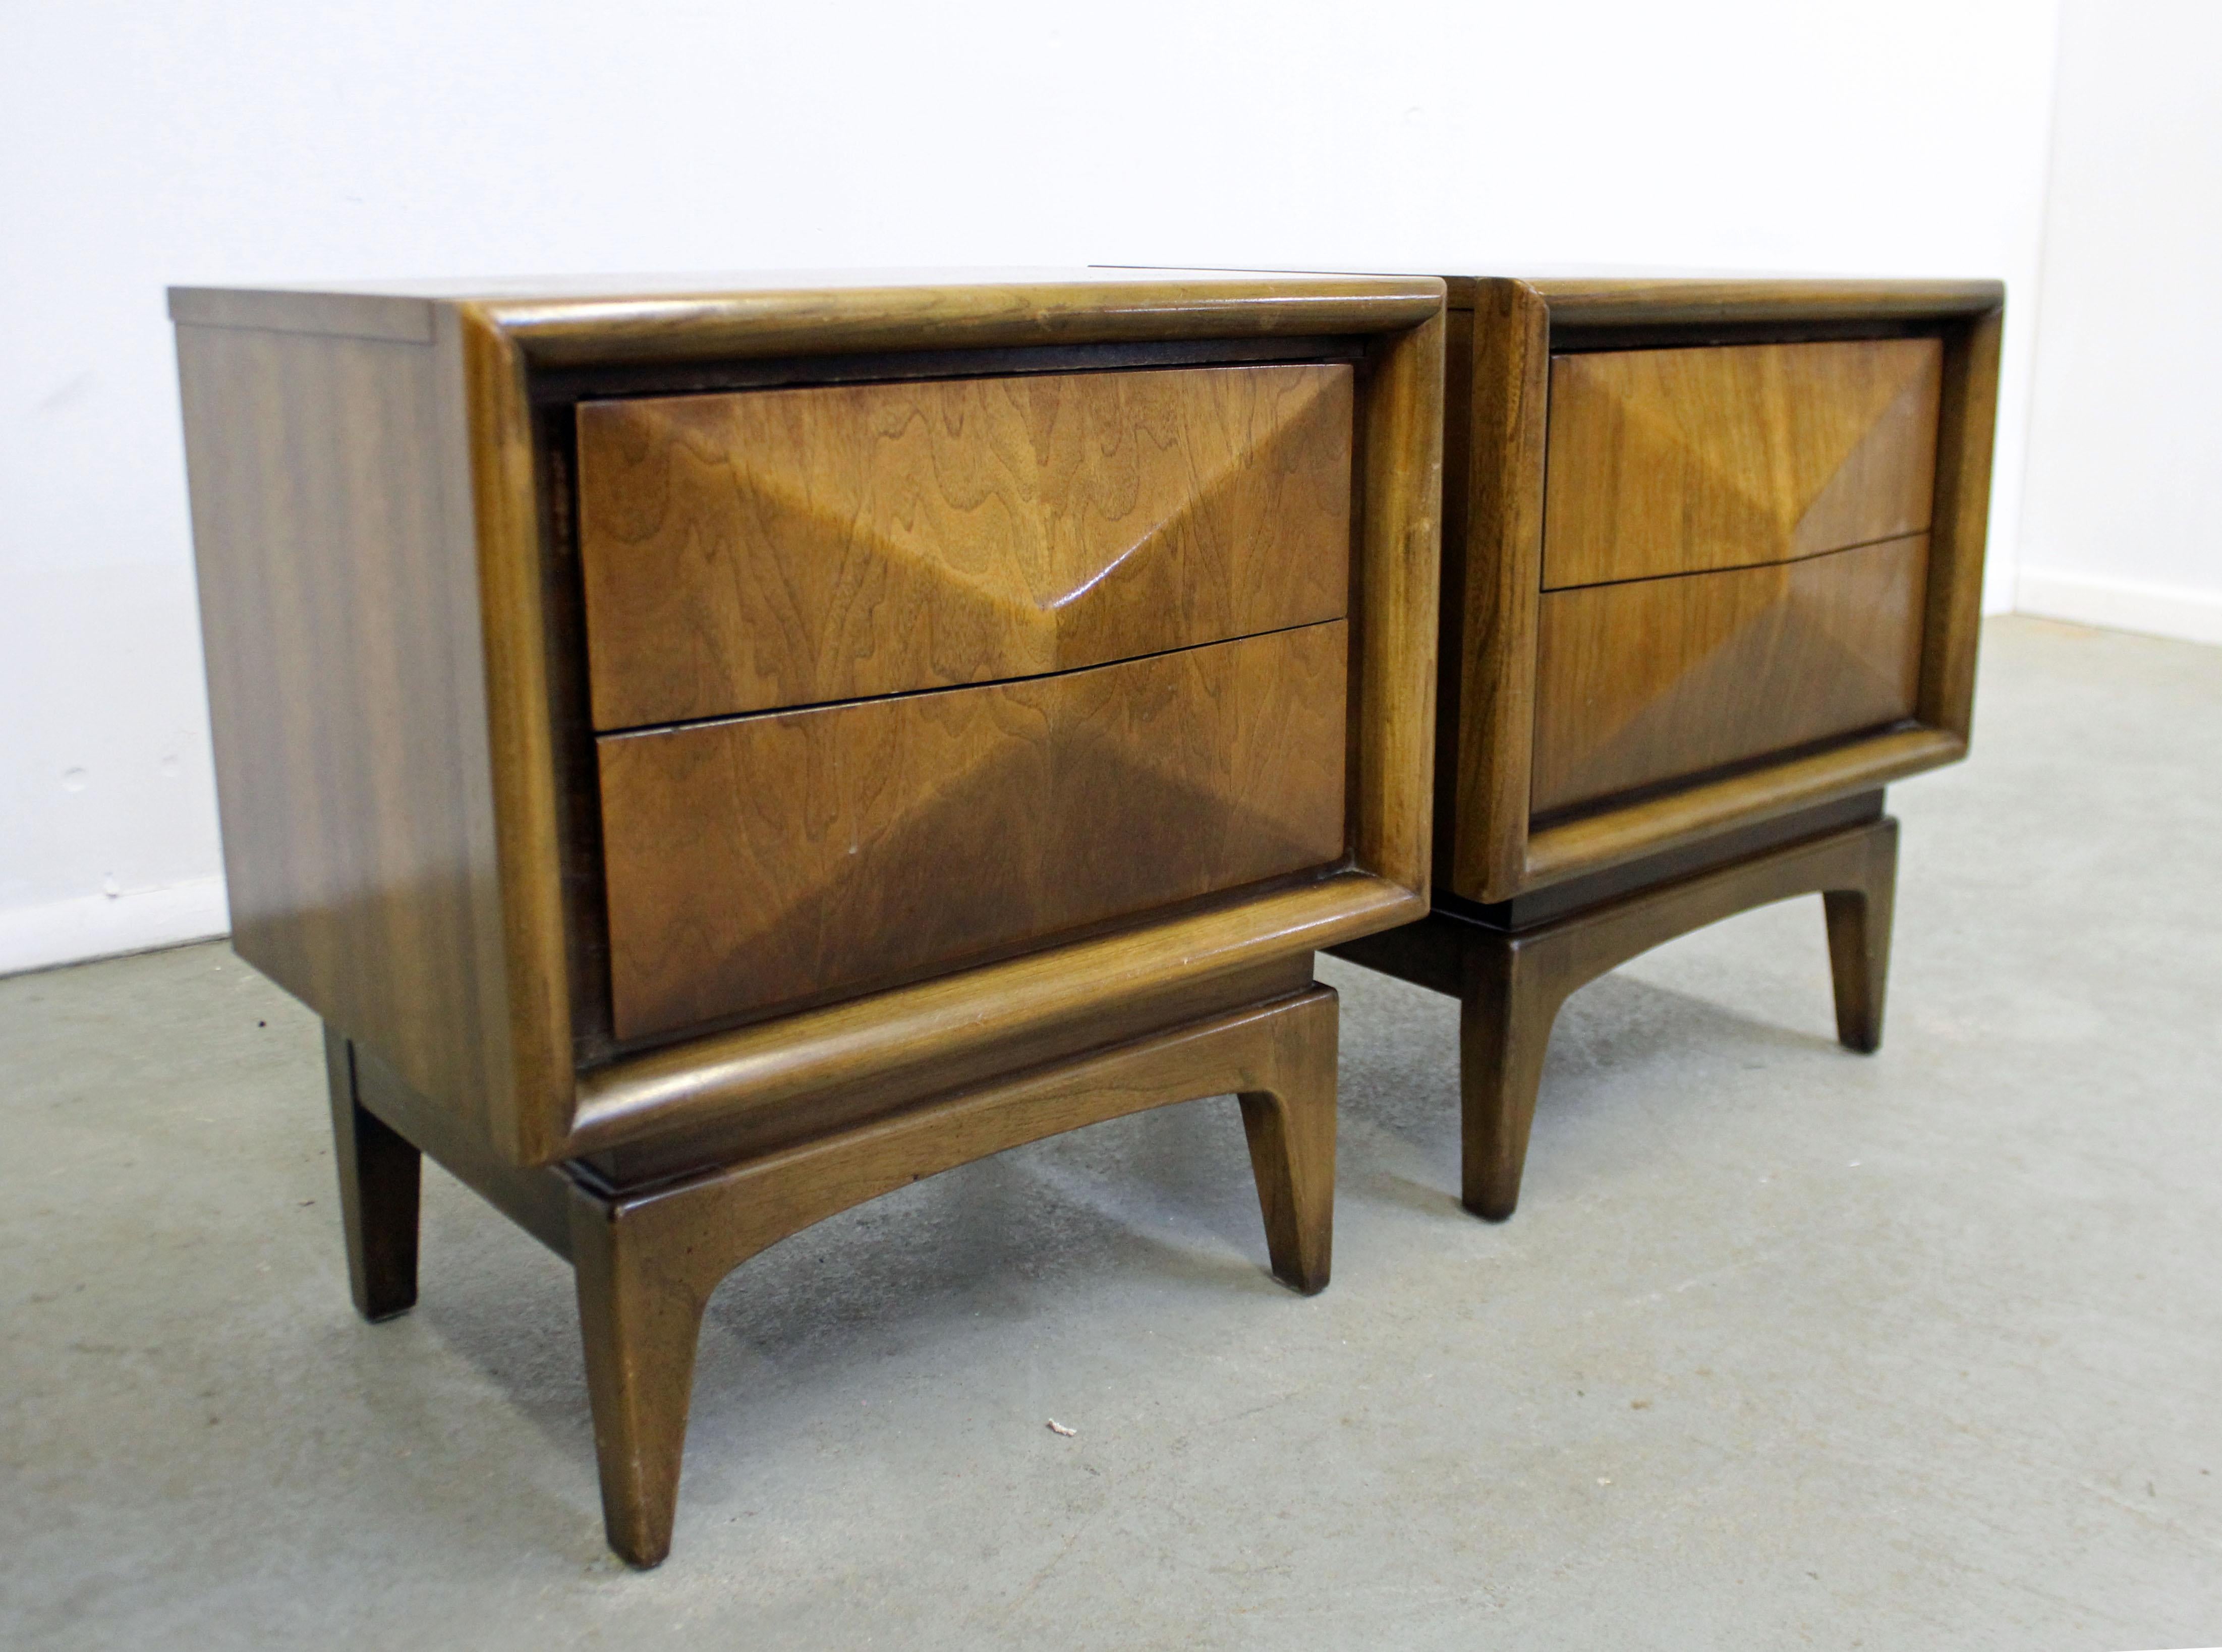 Offered is a pair of Mid-Century Modern nightstands made of walnut, each featuring a diamond style front with two dovetailed drawers and hidden side pulls. They are in good condition with slight surface scratches throughout. They are not signed, but